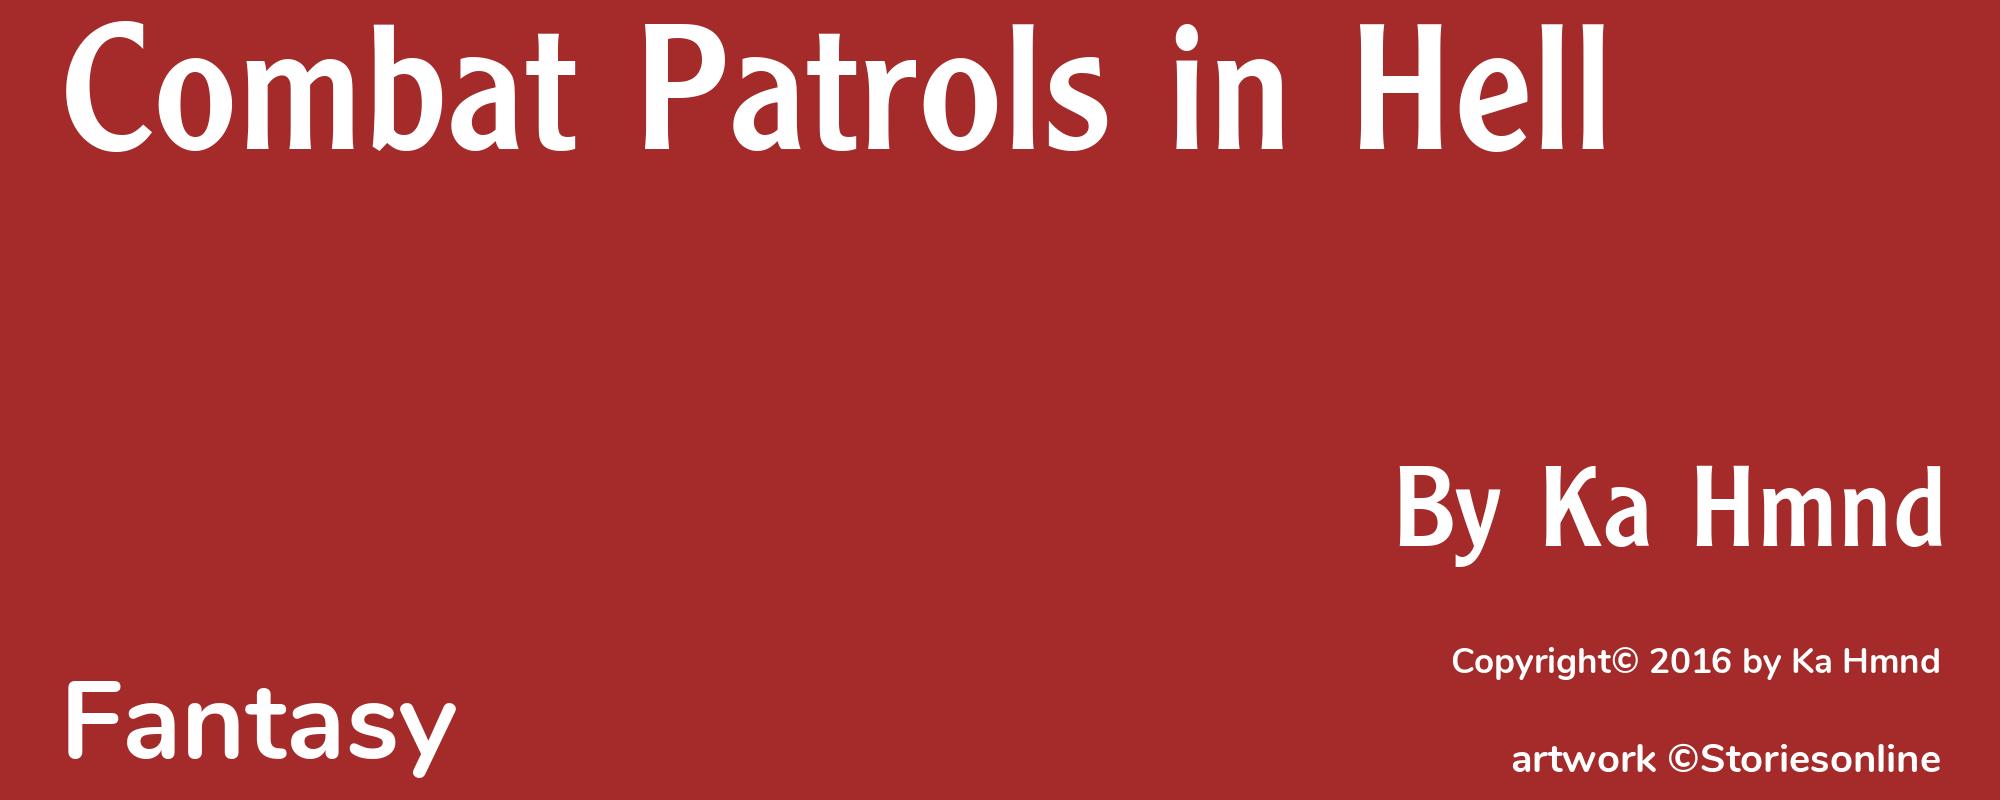 Combat Patrols in Hell - Cover